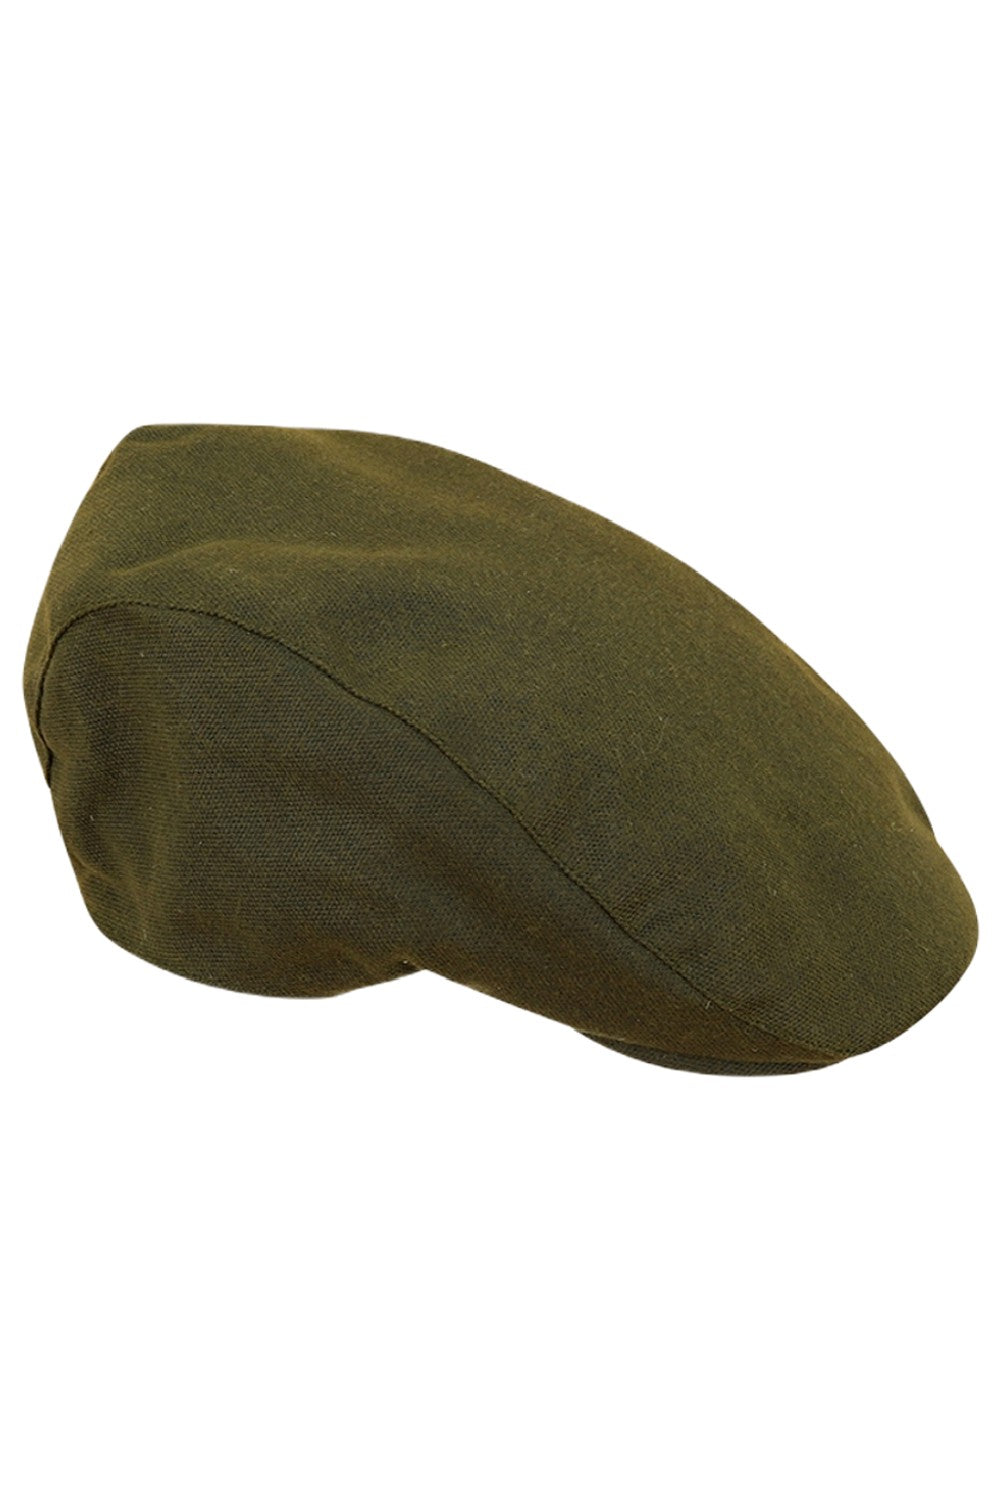 Hoggs of Fife Waterproof Cotton Canvas Cap in Olive 